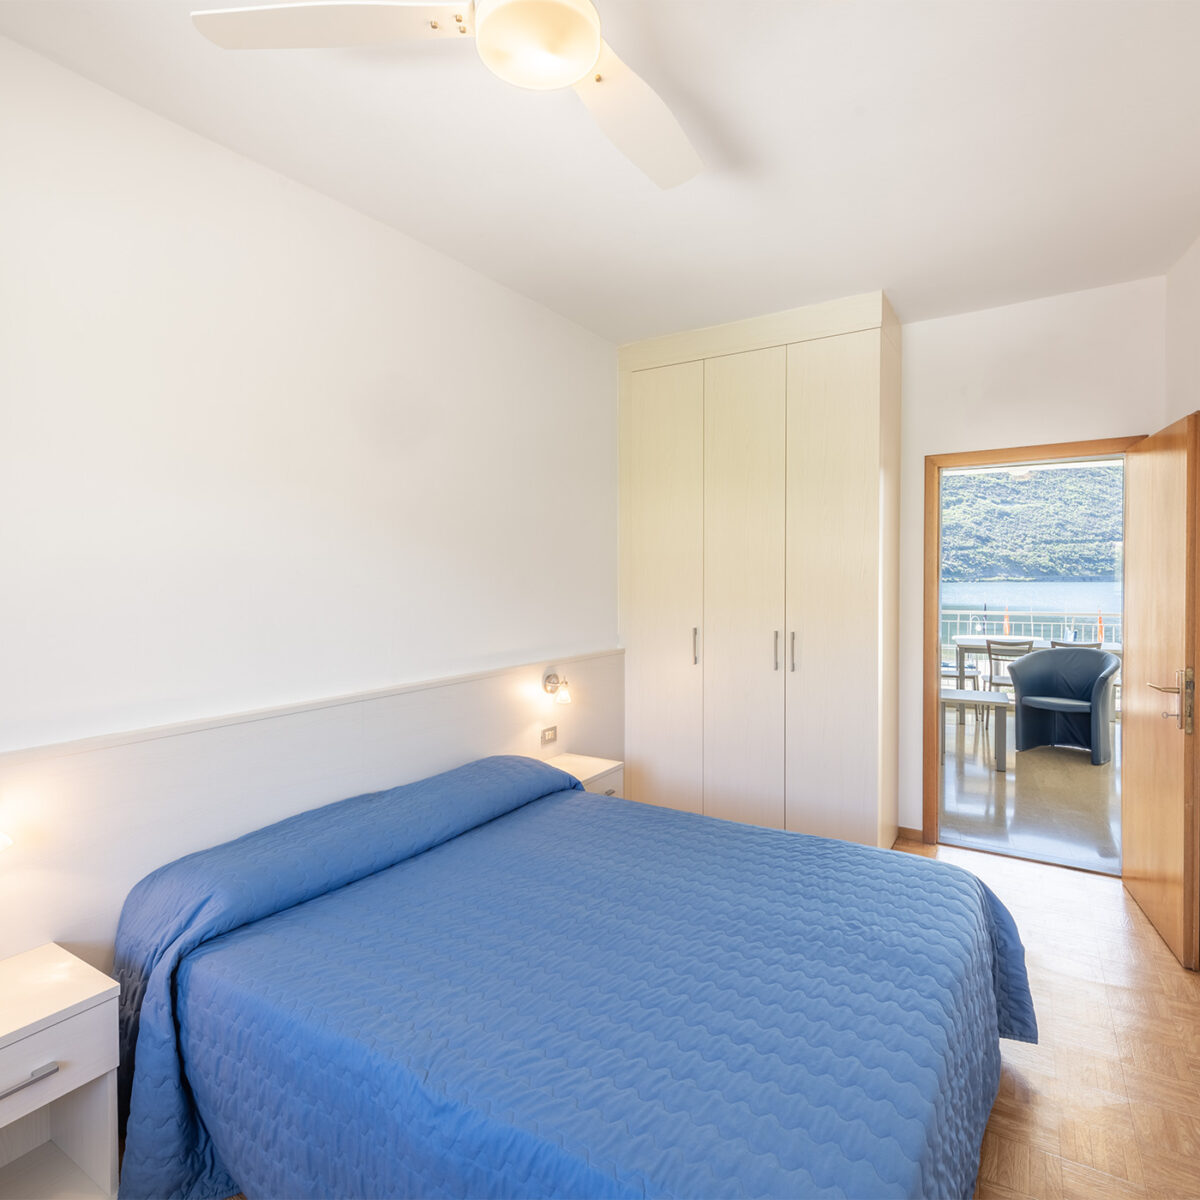 The bedroom has a spacious double bed and ample wardrobes